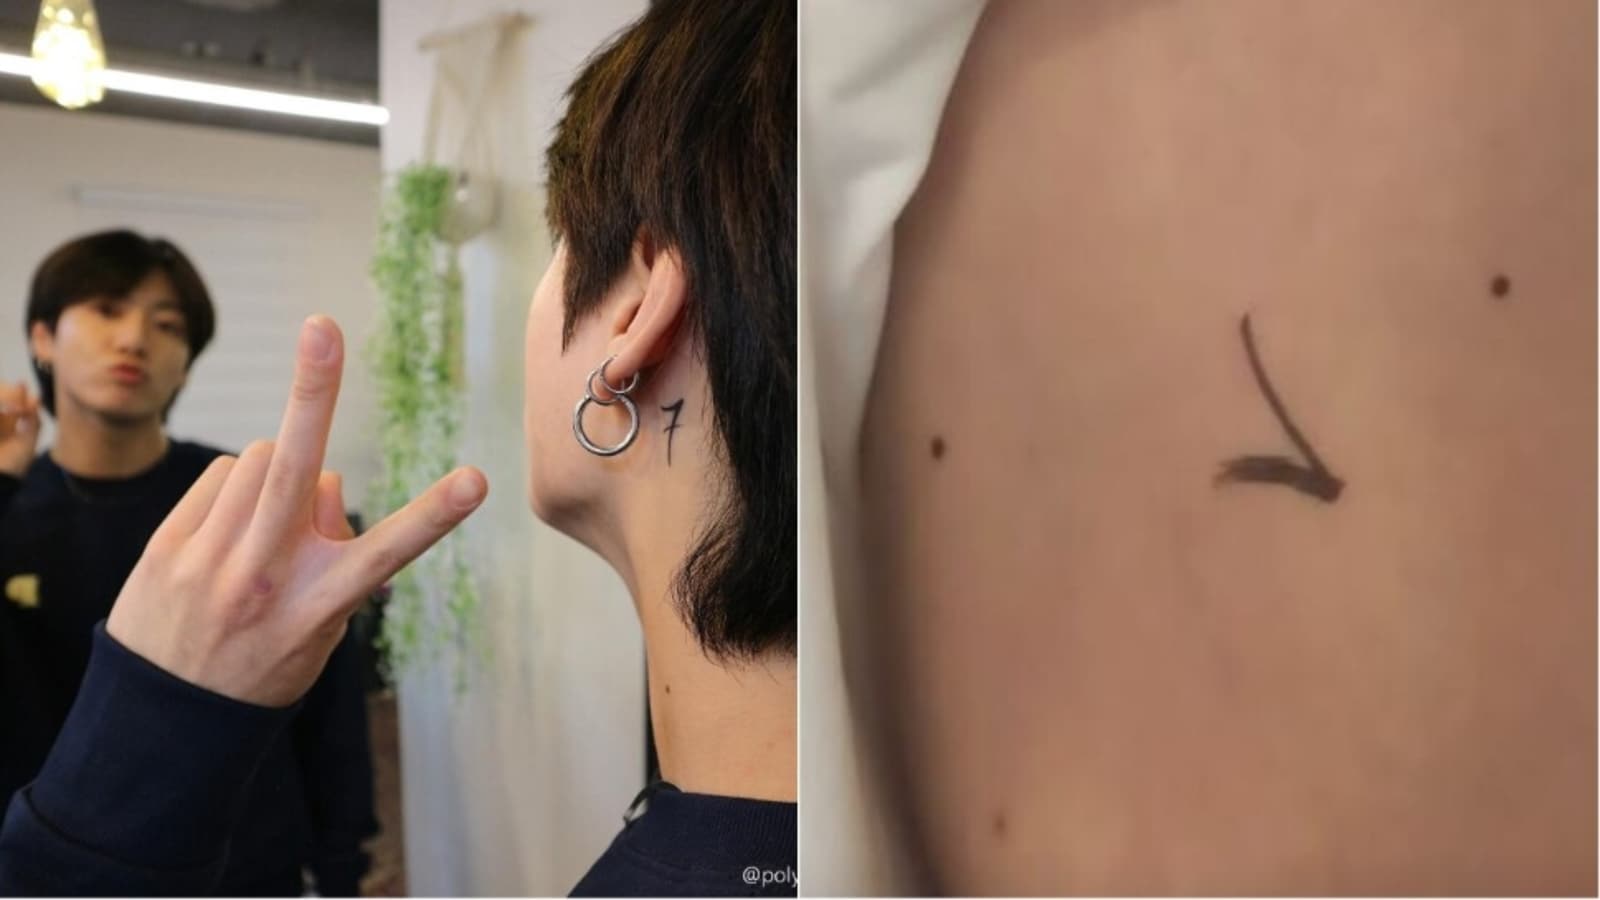 BTS: Jungkook flaunts new friendship tattoo behind ear, gives glimpse of full sleeve; V gets ‘7’ inked on arm. See pics